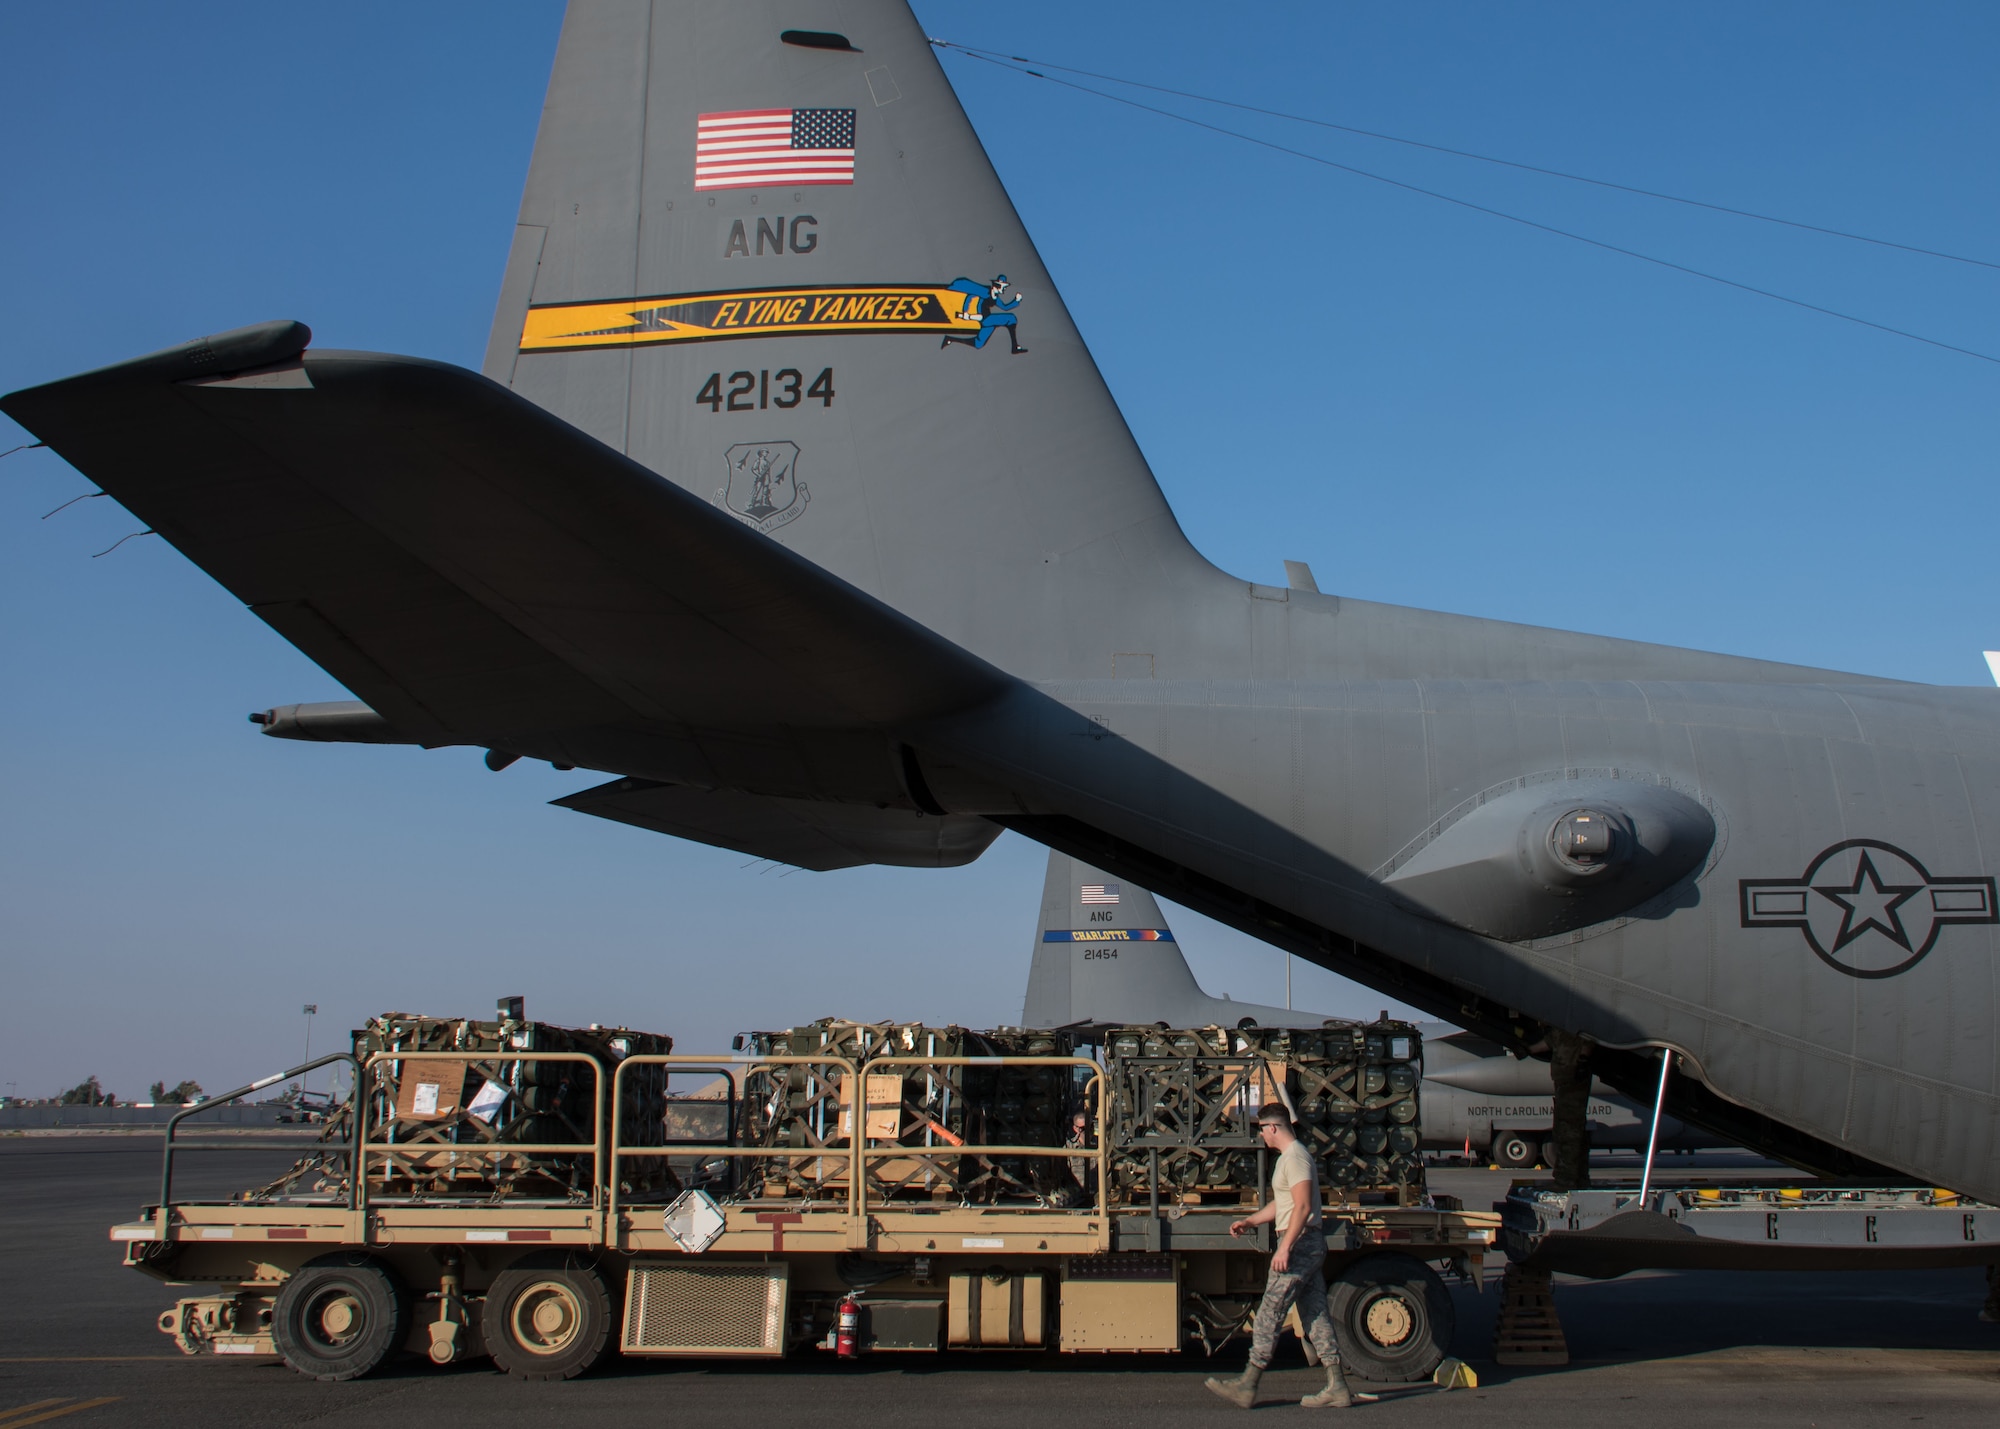 A 386th Expeditionary Logistics Readiness Squadron aerial porter inspects pallets on a K-loader at an undisclosed location in Southwest Asia March 27, 2017. The pallets were loaded onto a C-130H Hercules deployed with the Connecticut Air National Guard, which is currently flying its first C-130 deployment. (U.S. Air Force photo/Staff Sgt. Andrew Park)